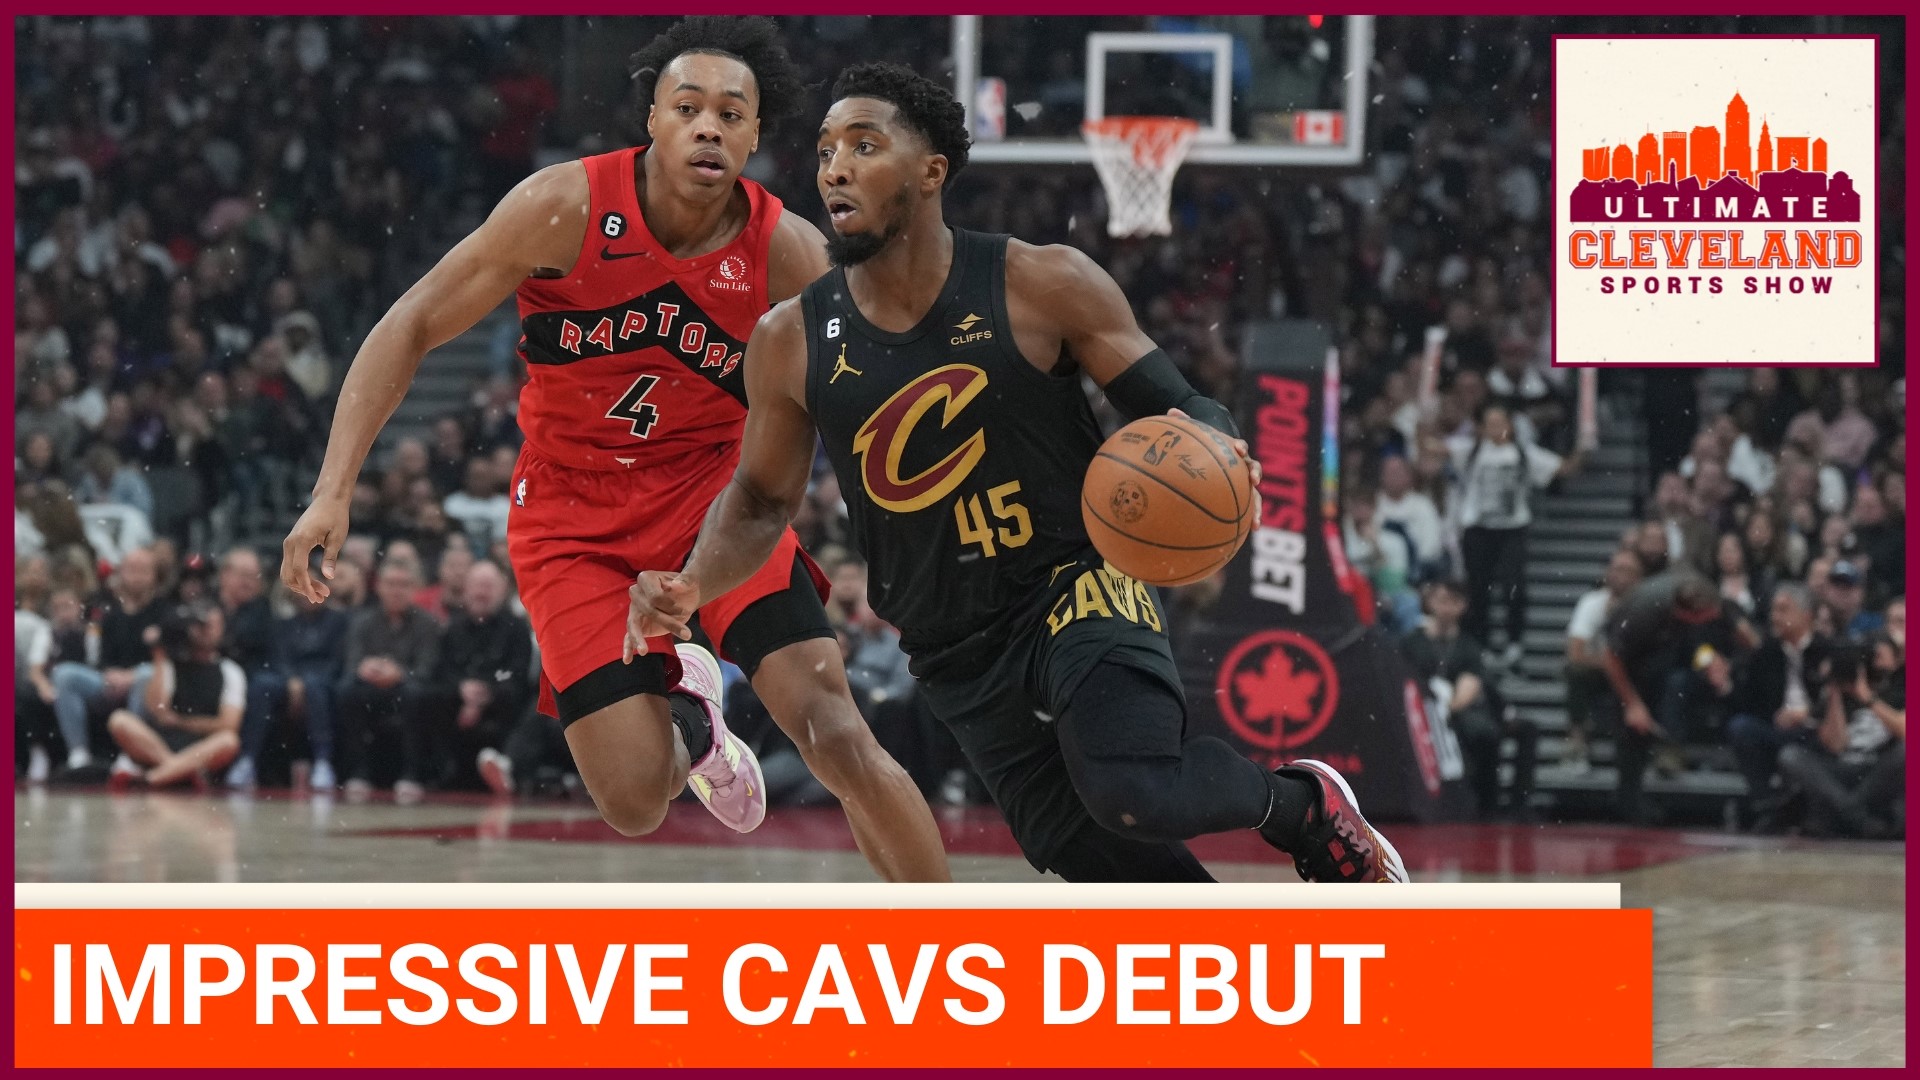 Donovan Mitchell made his official Cleveland Cavaliers debut in a 108-105 loss to the Toronto Raptors on Wednesday, were you impressed?